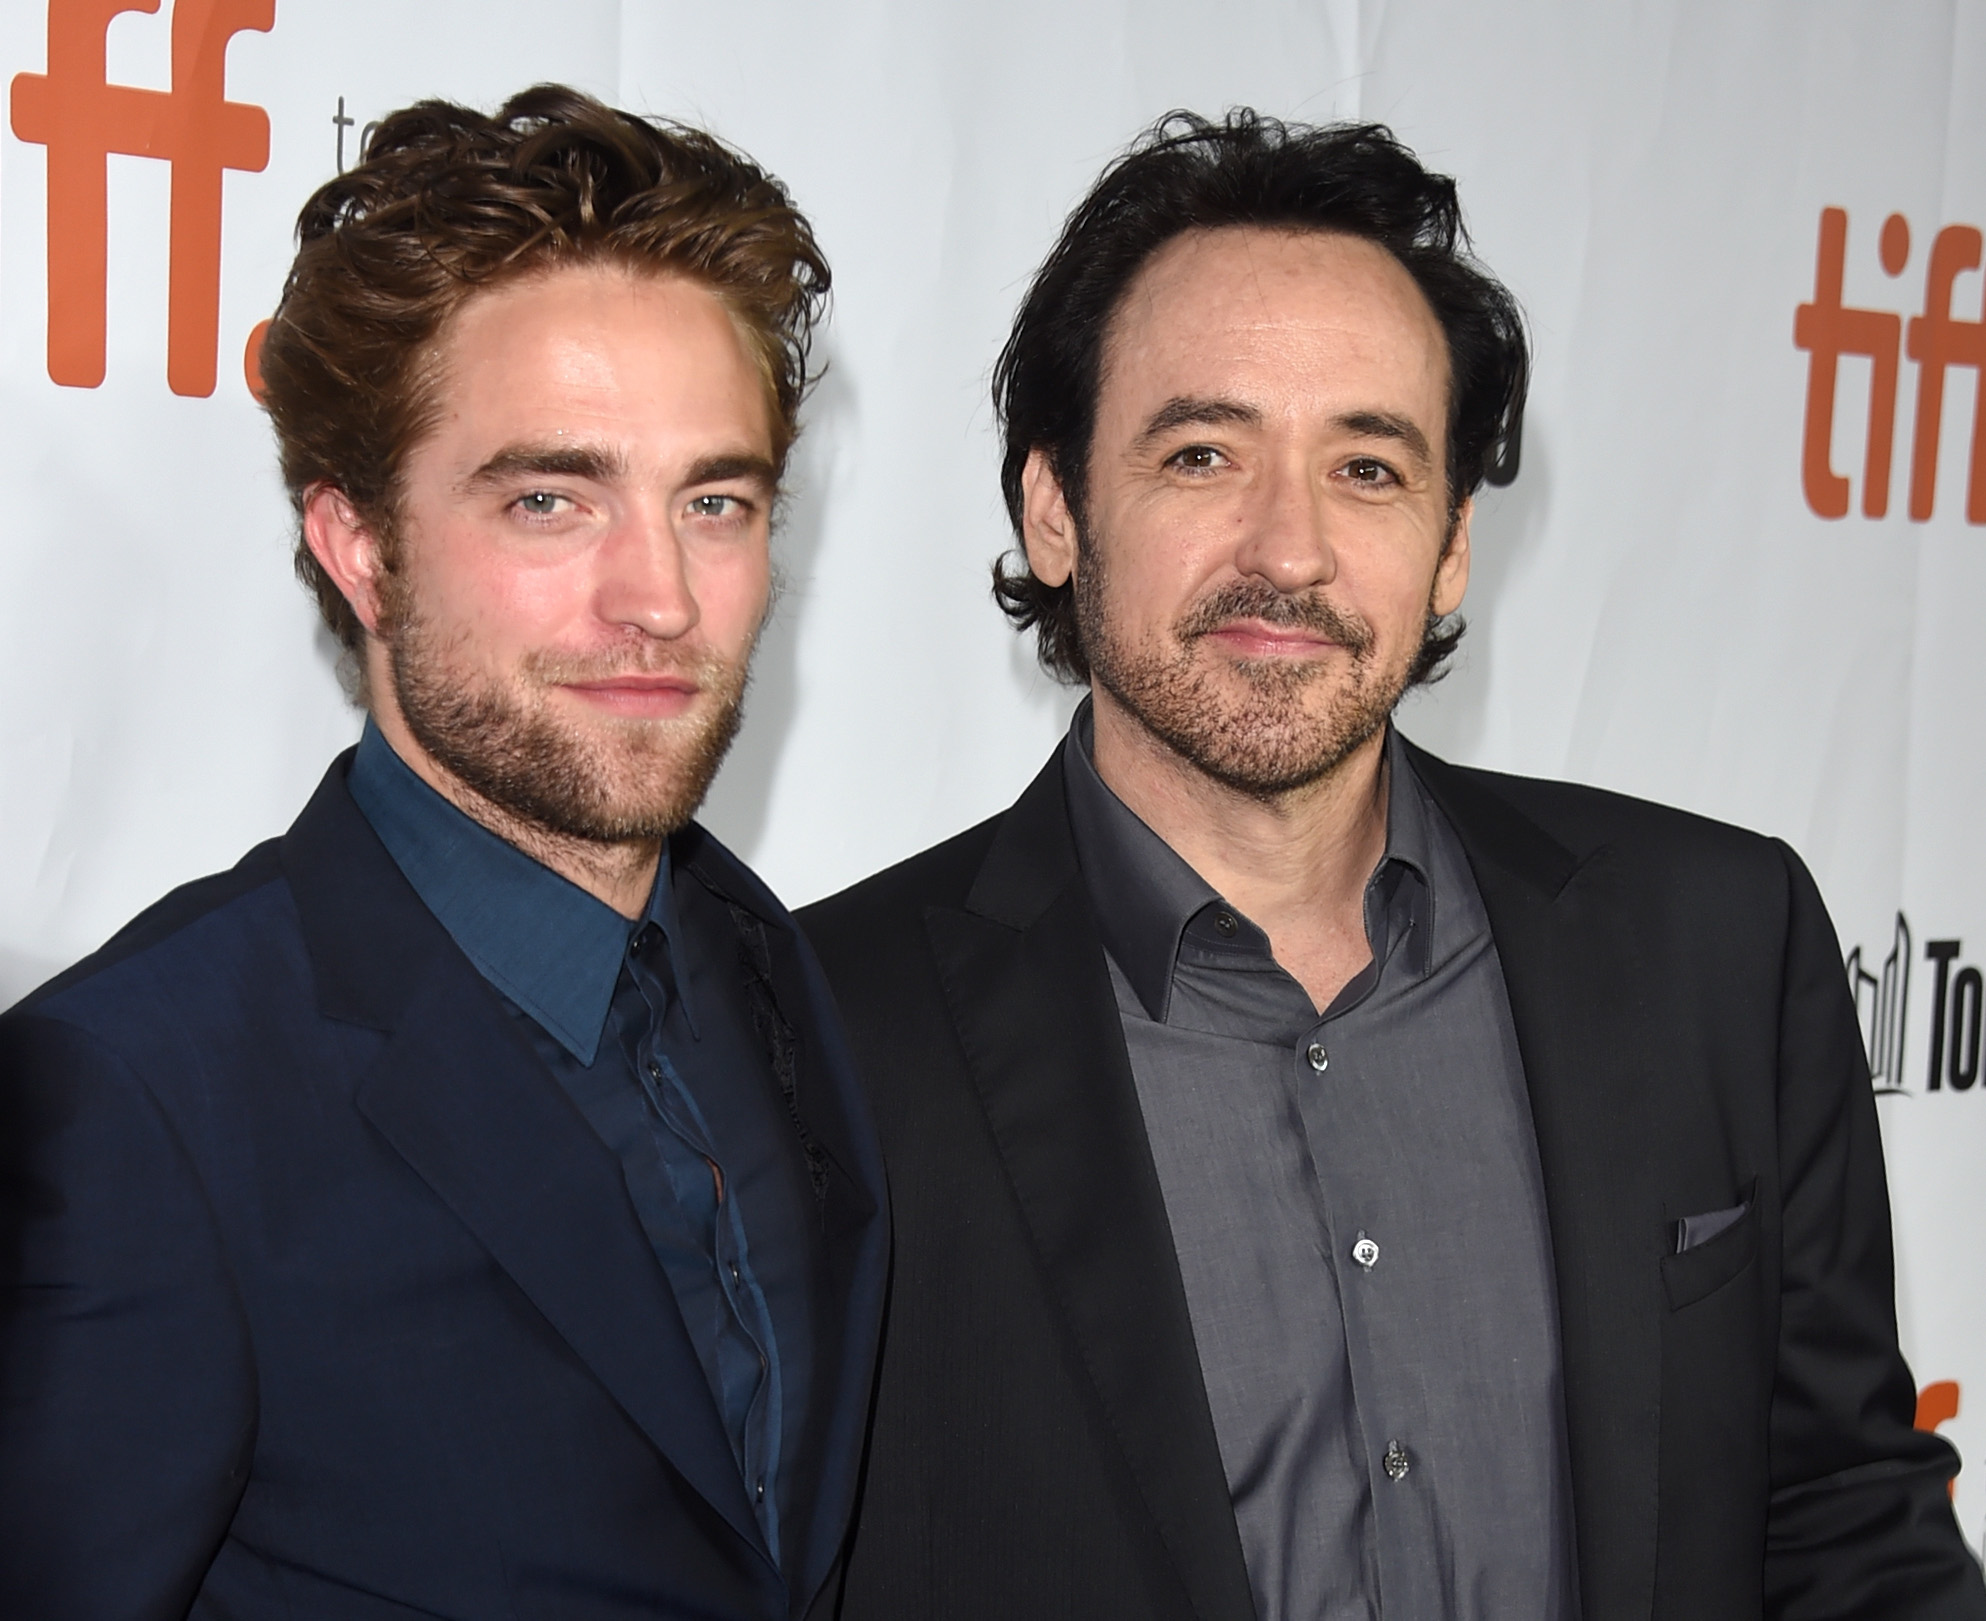 John Cusack and Robert Pattinson at event of Maps to the Stars (2014)